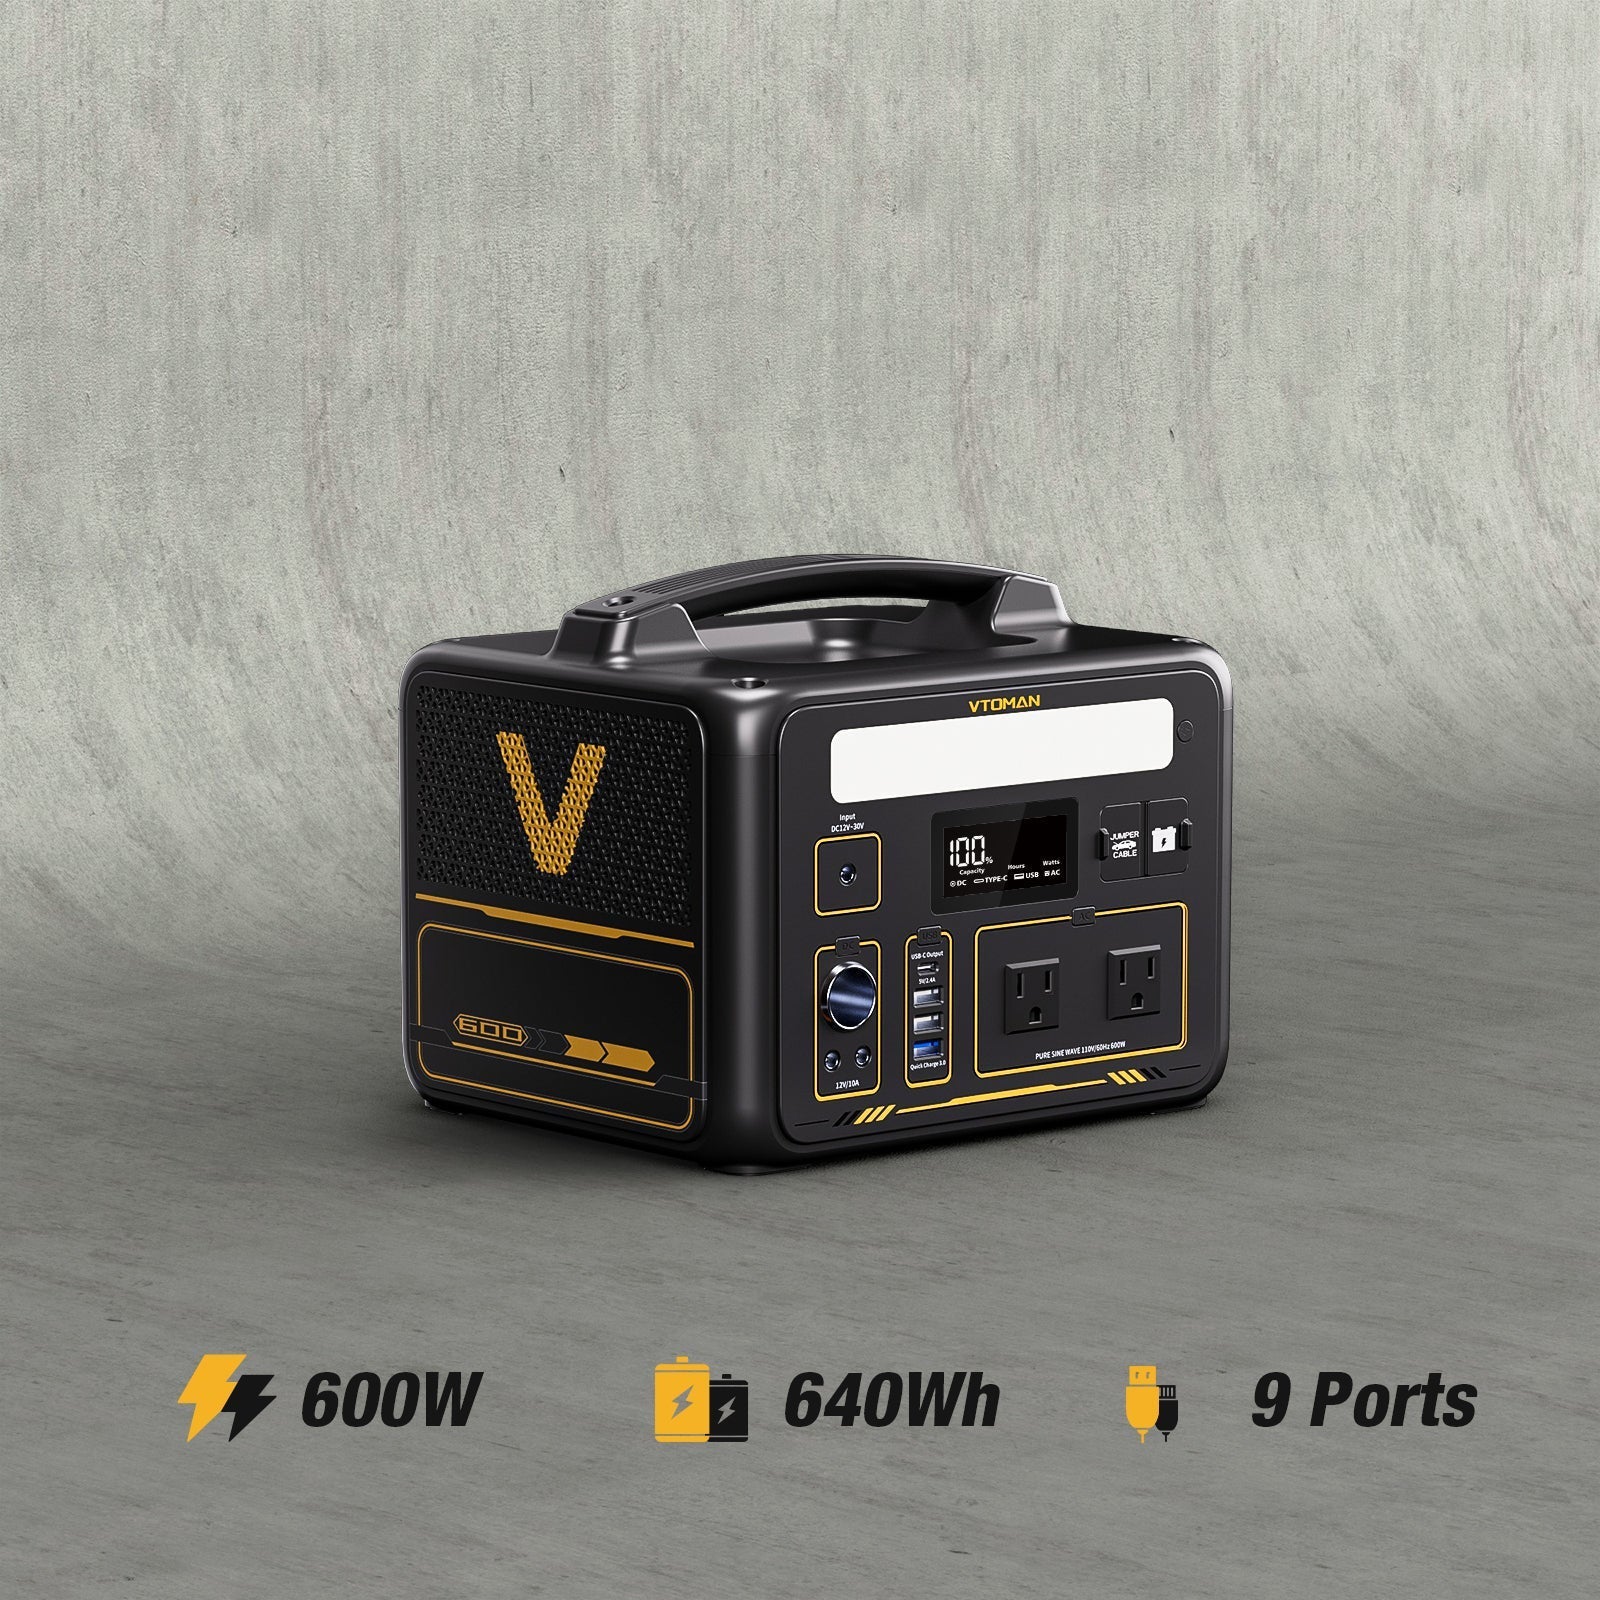 jump 600 power station with 600W output and 640wh capacity